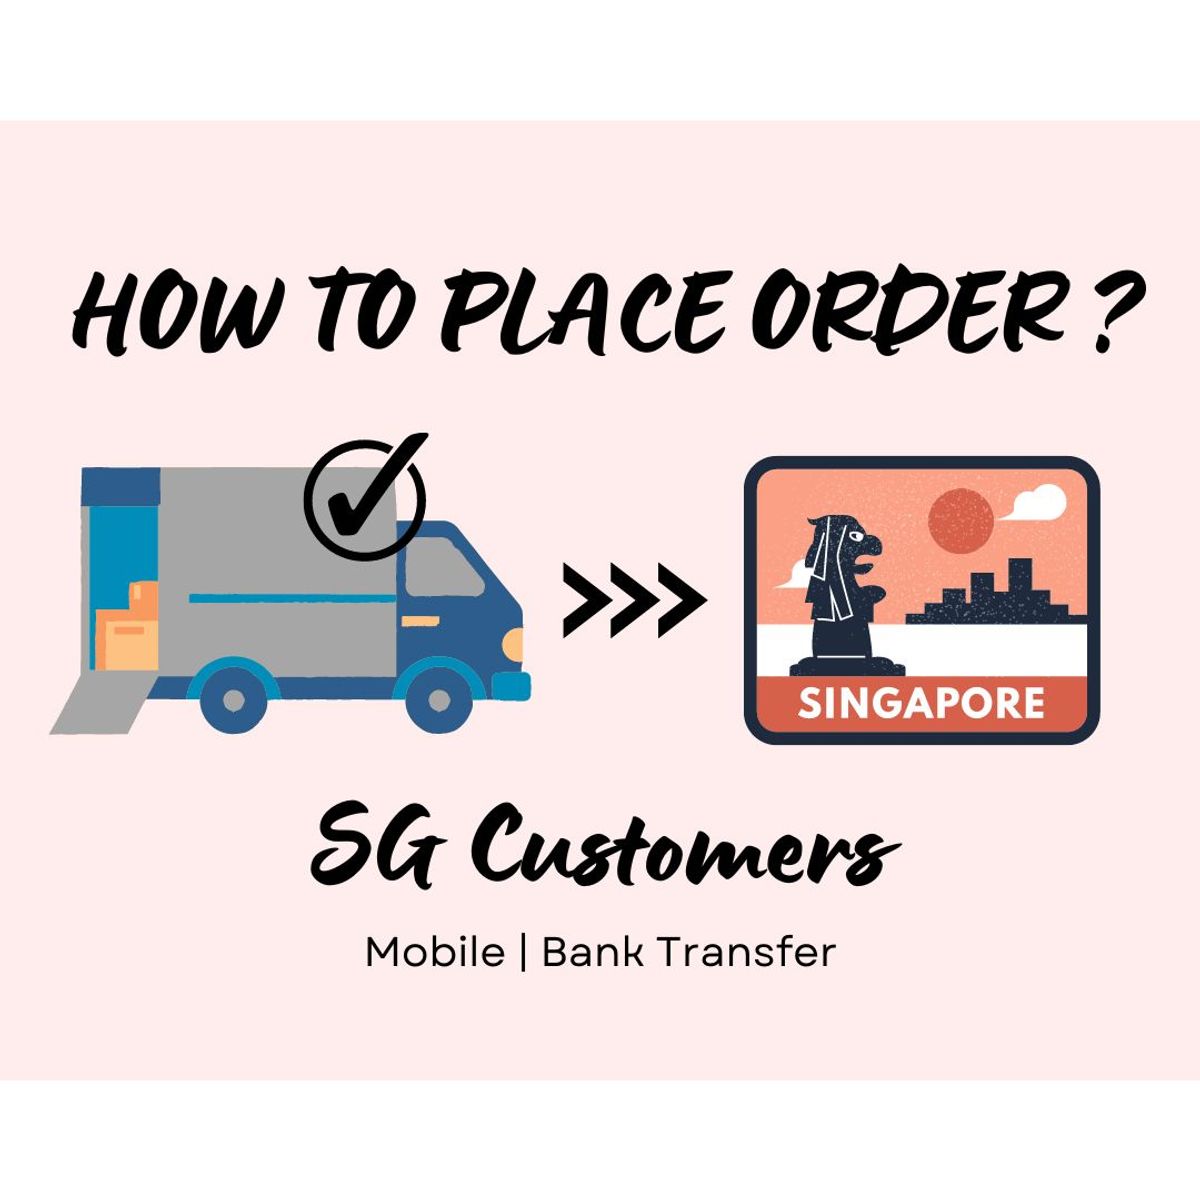 Guide for SG customers to place order [Mobile | Bank Transfer]